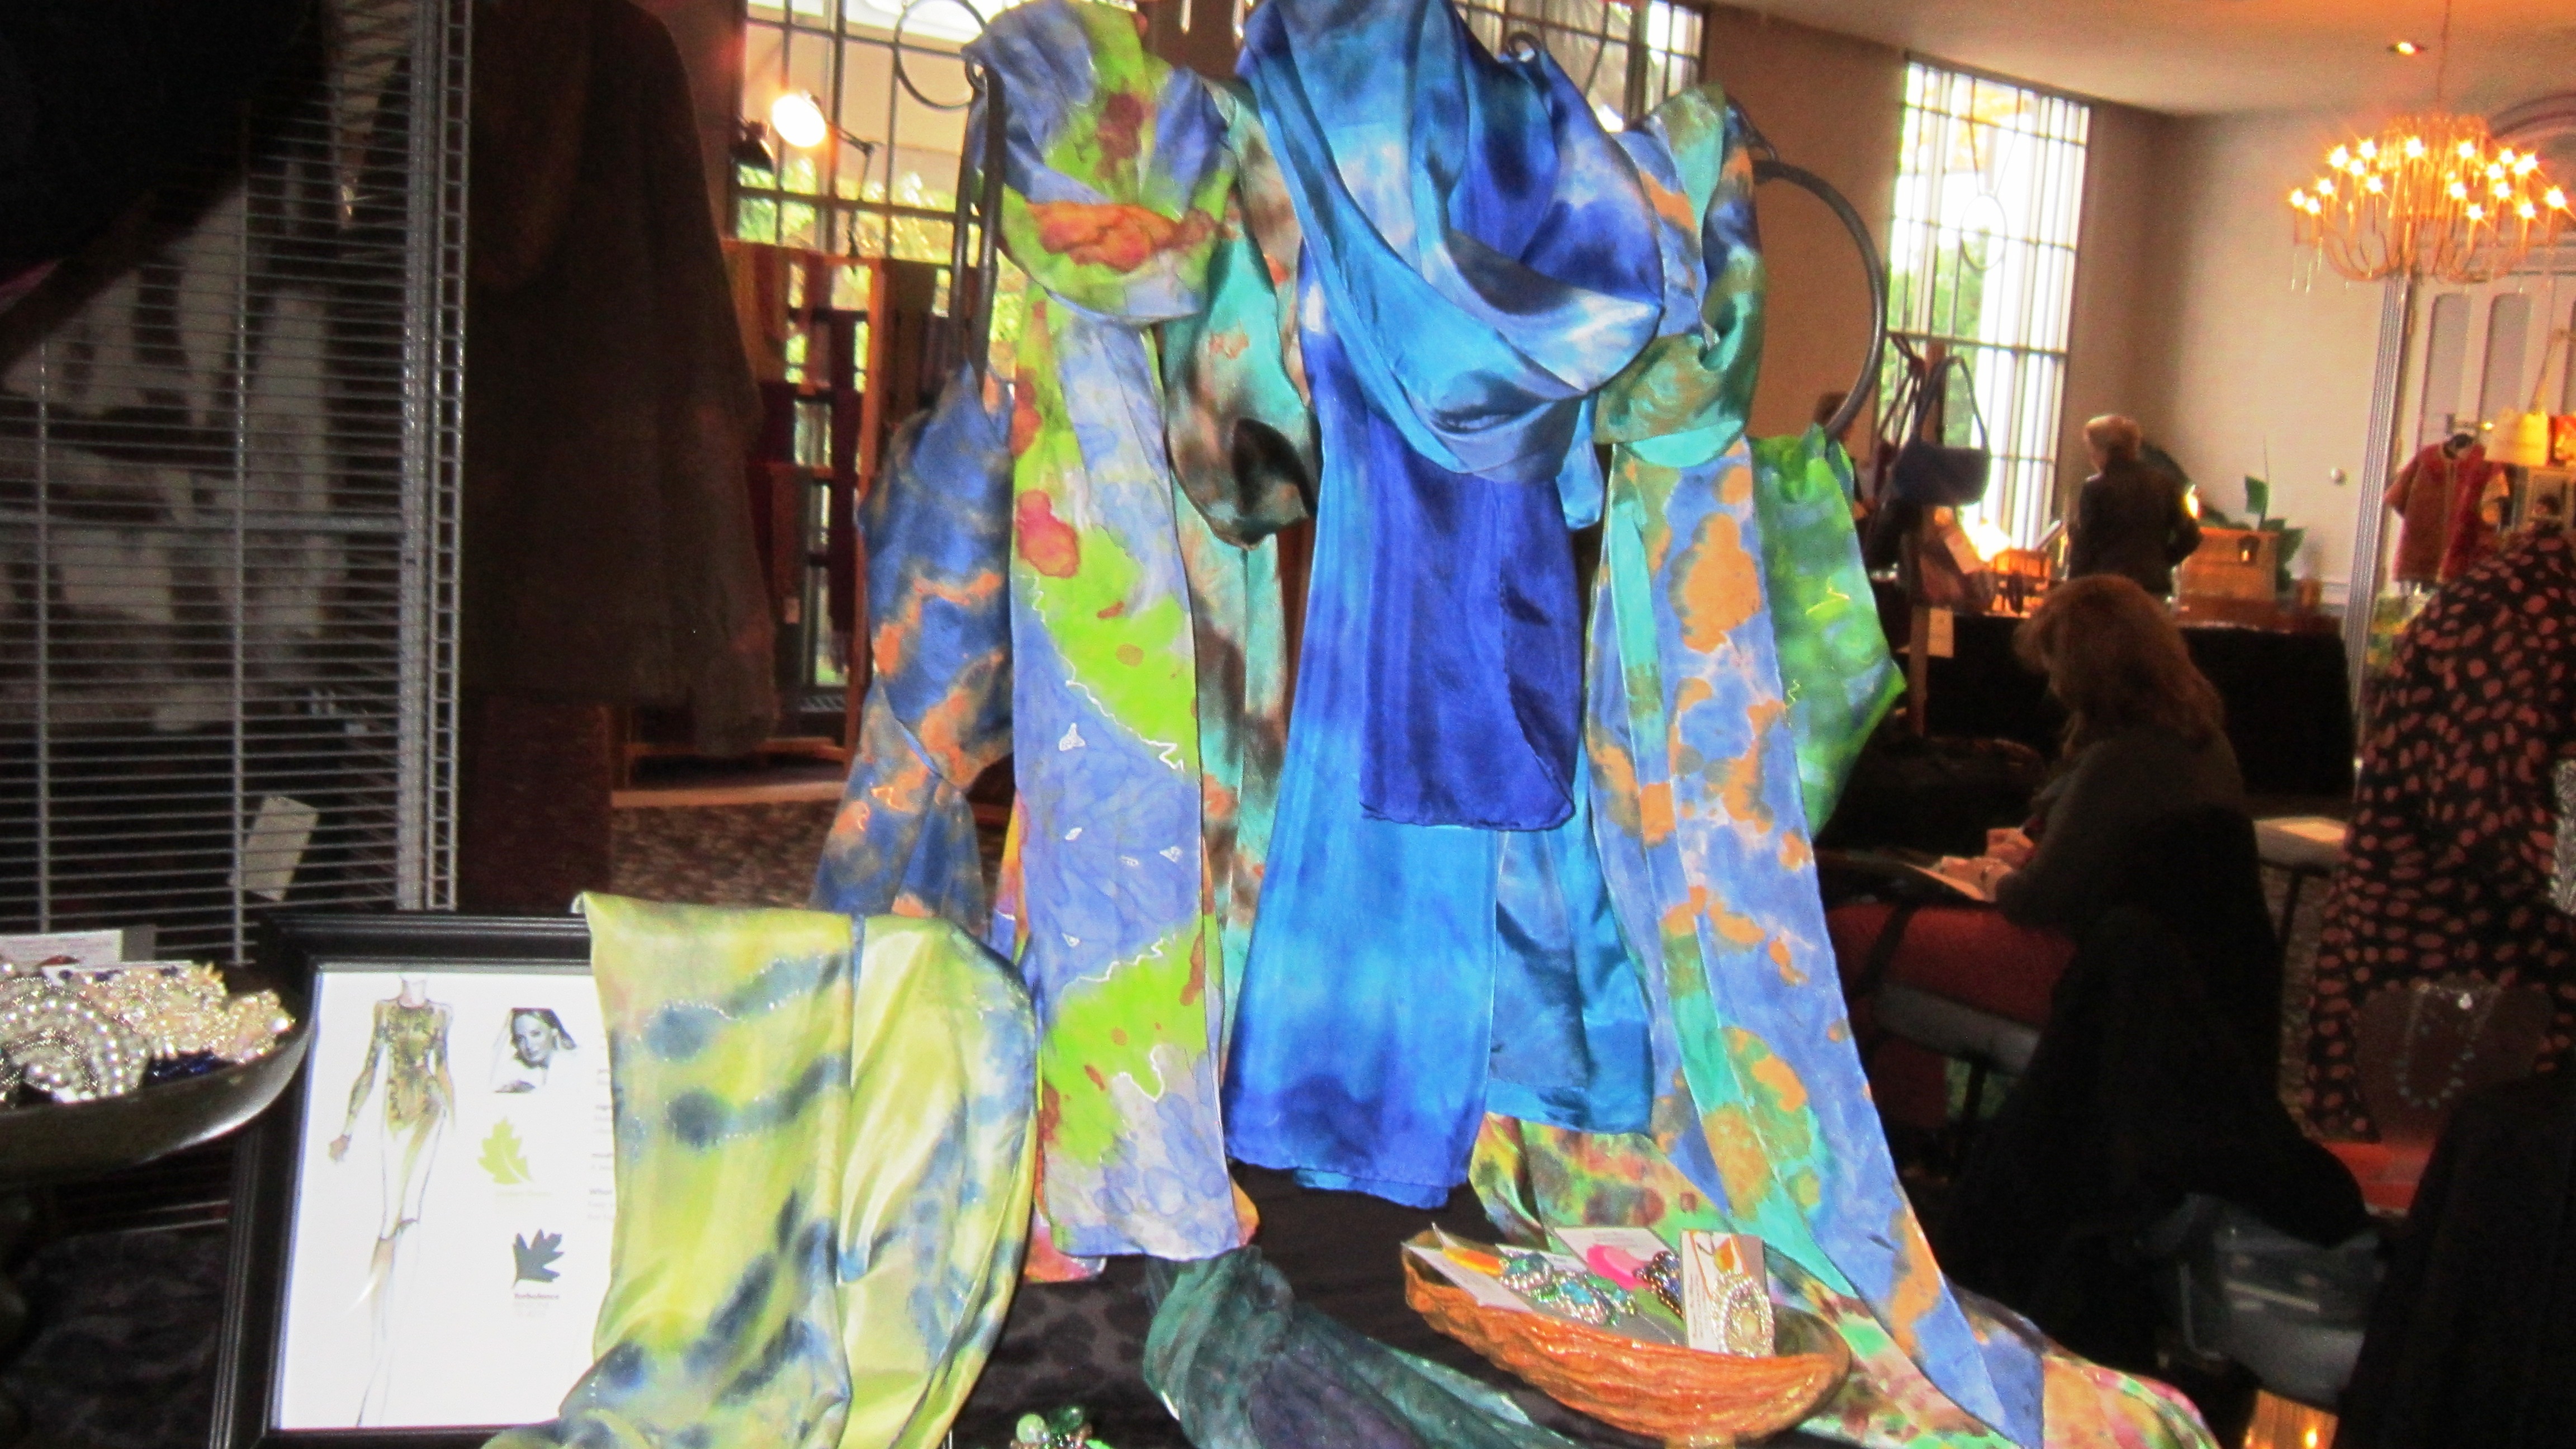 My booth - cool tones.  The scarf on the left in celery and blue was an amazing surprise that it sold quickly.